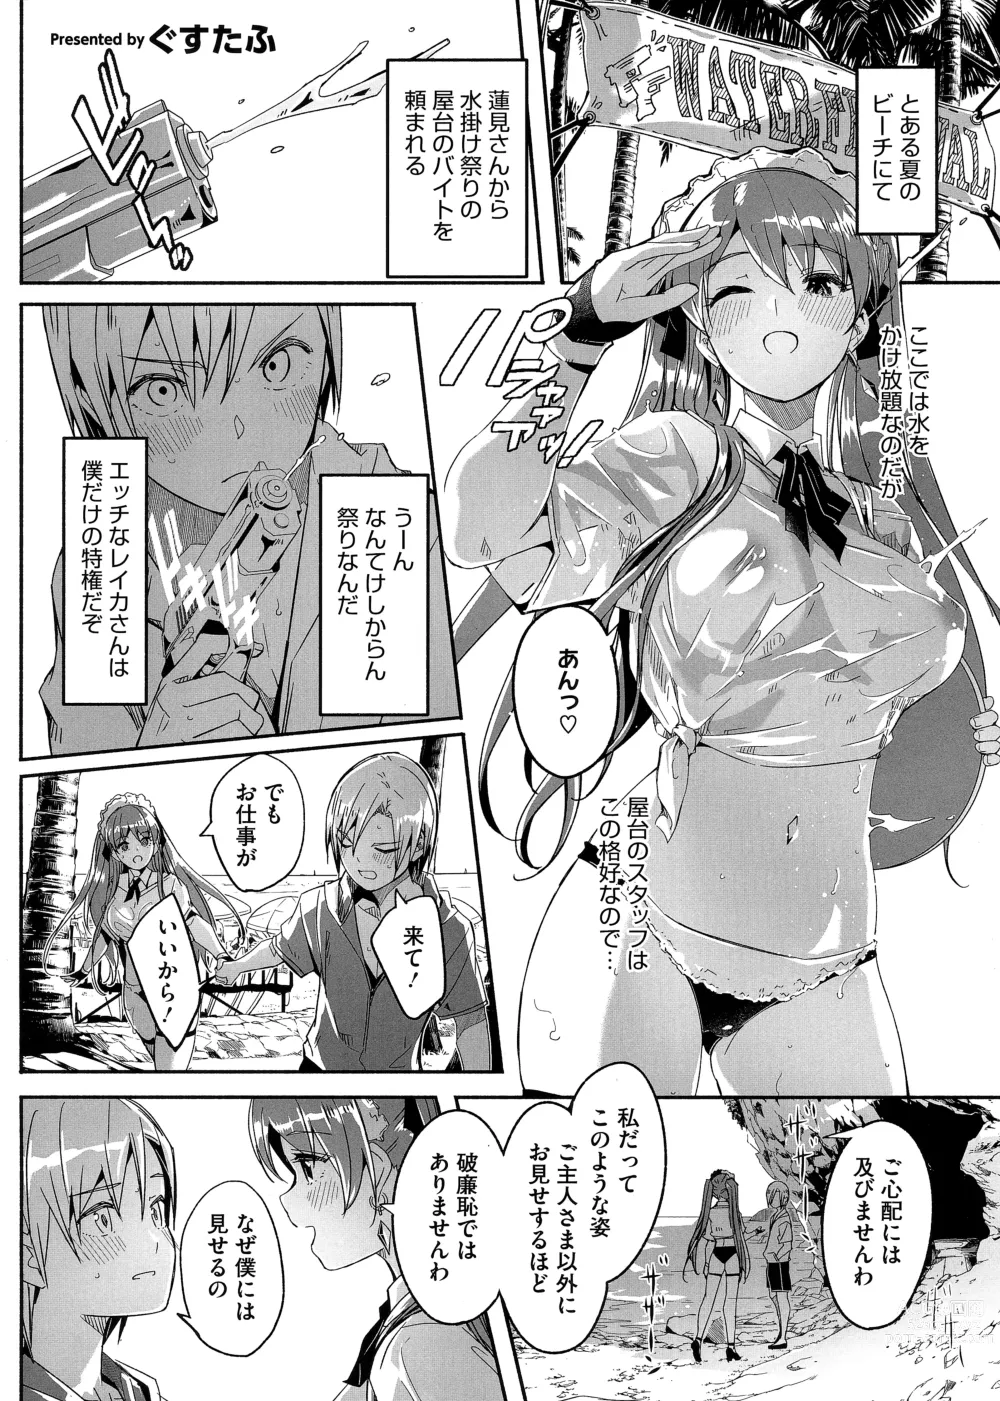 Page 10 of doujinshi HotMilk Festival All Star Comic 2